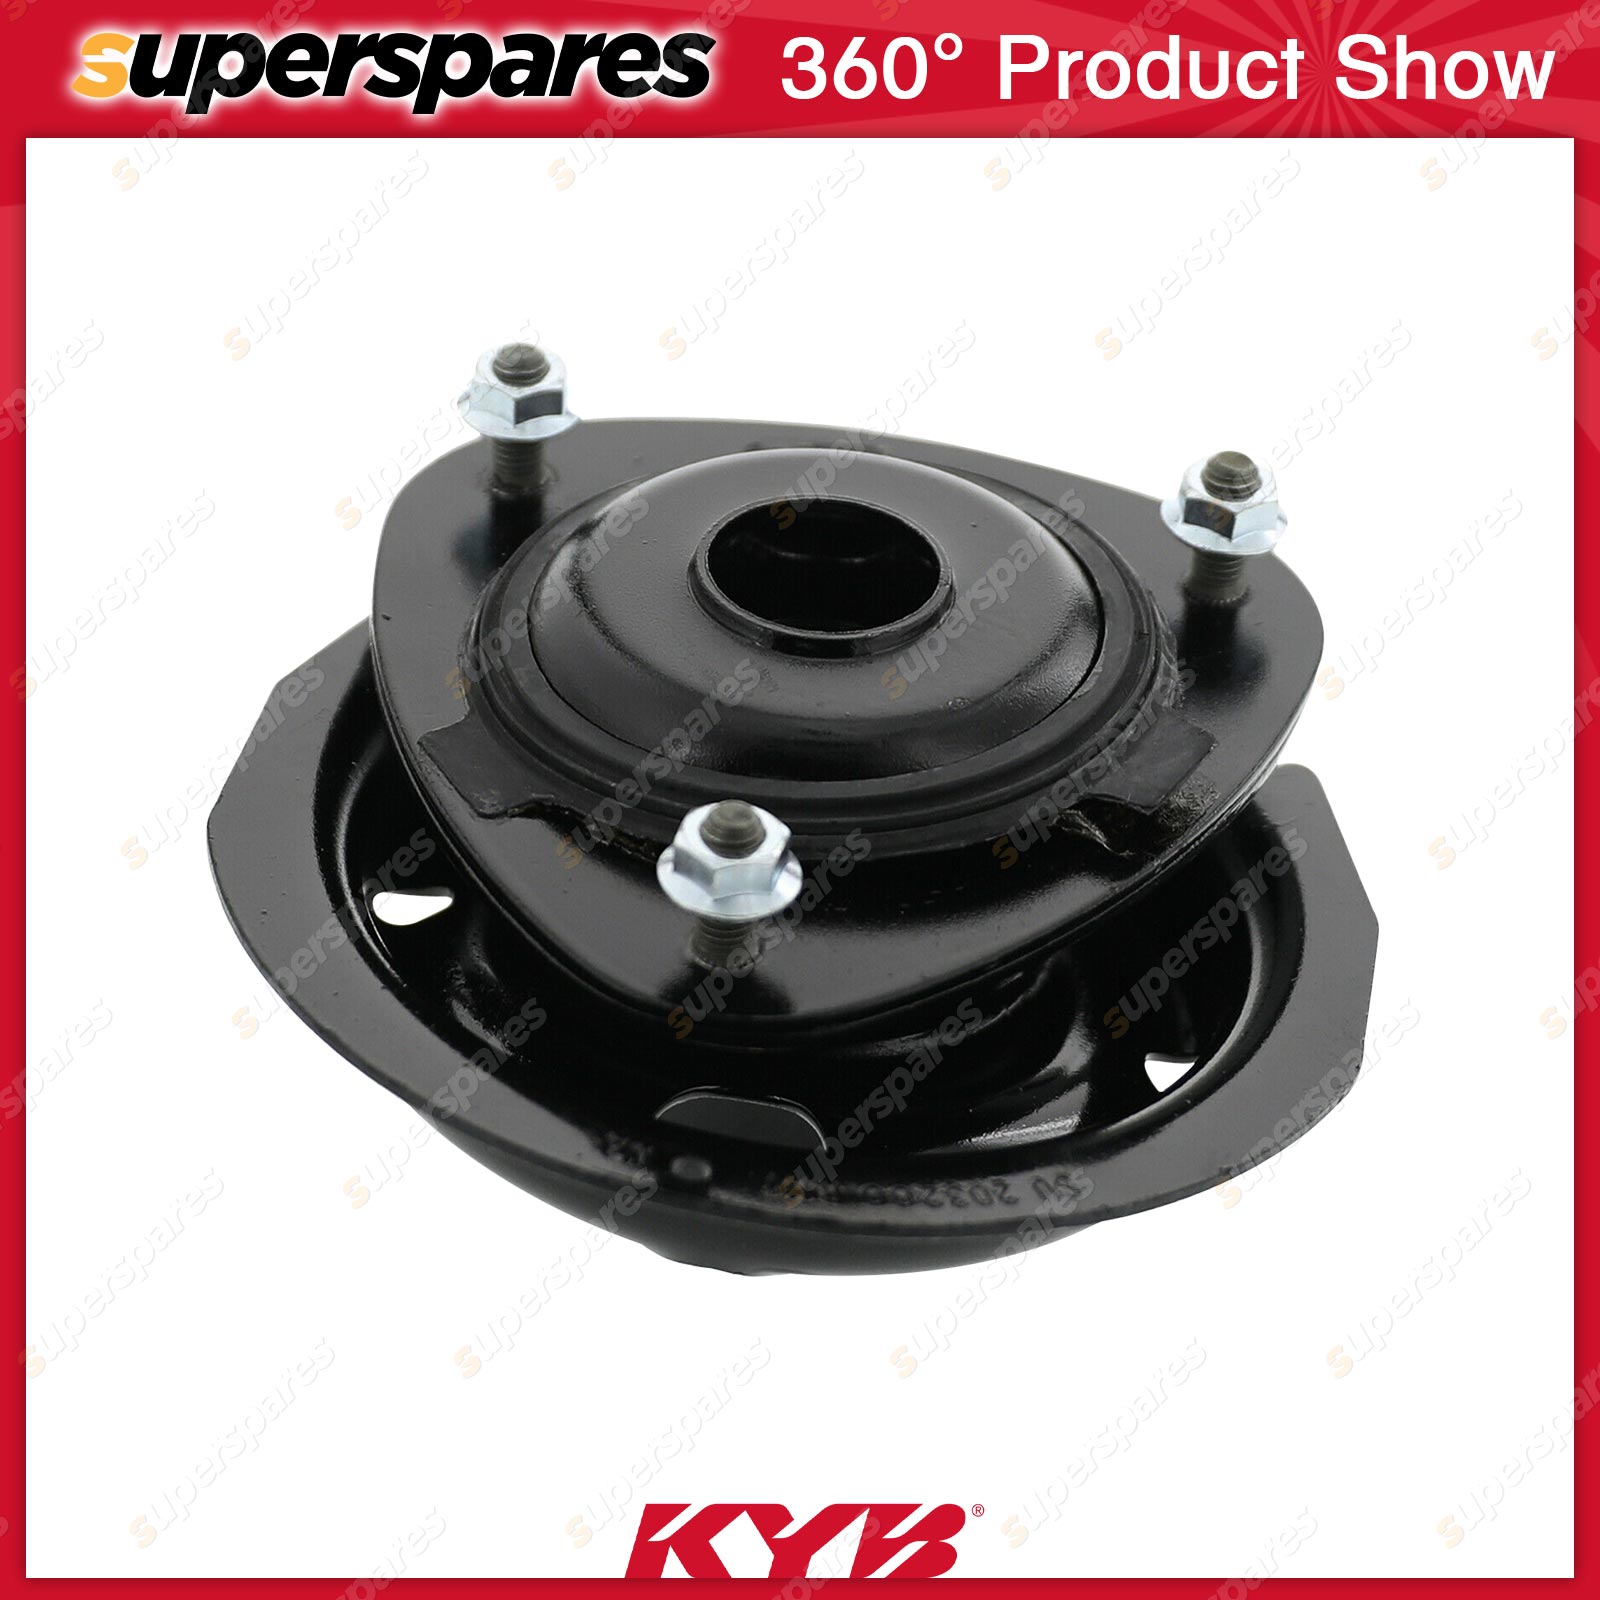 2Pcs KYB Rear Top Strut Mount for Subaru Forester SF5 GT